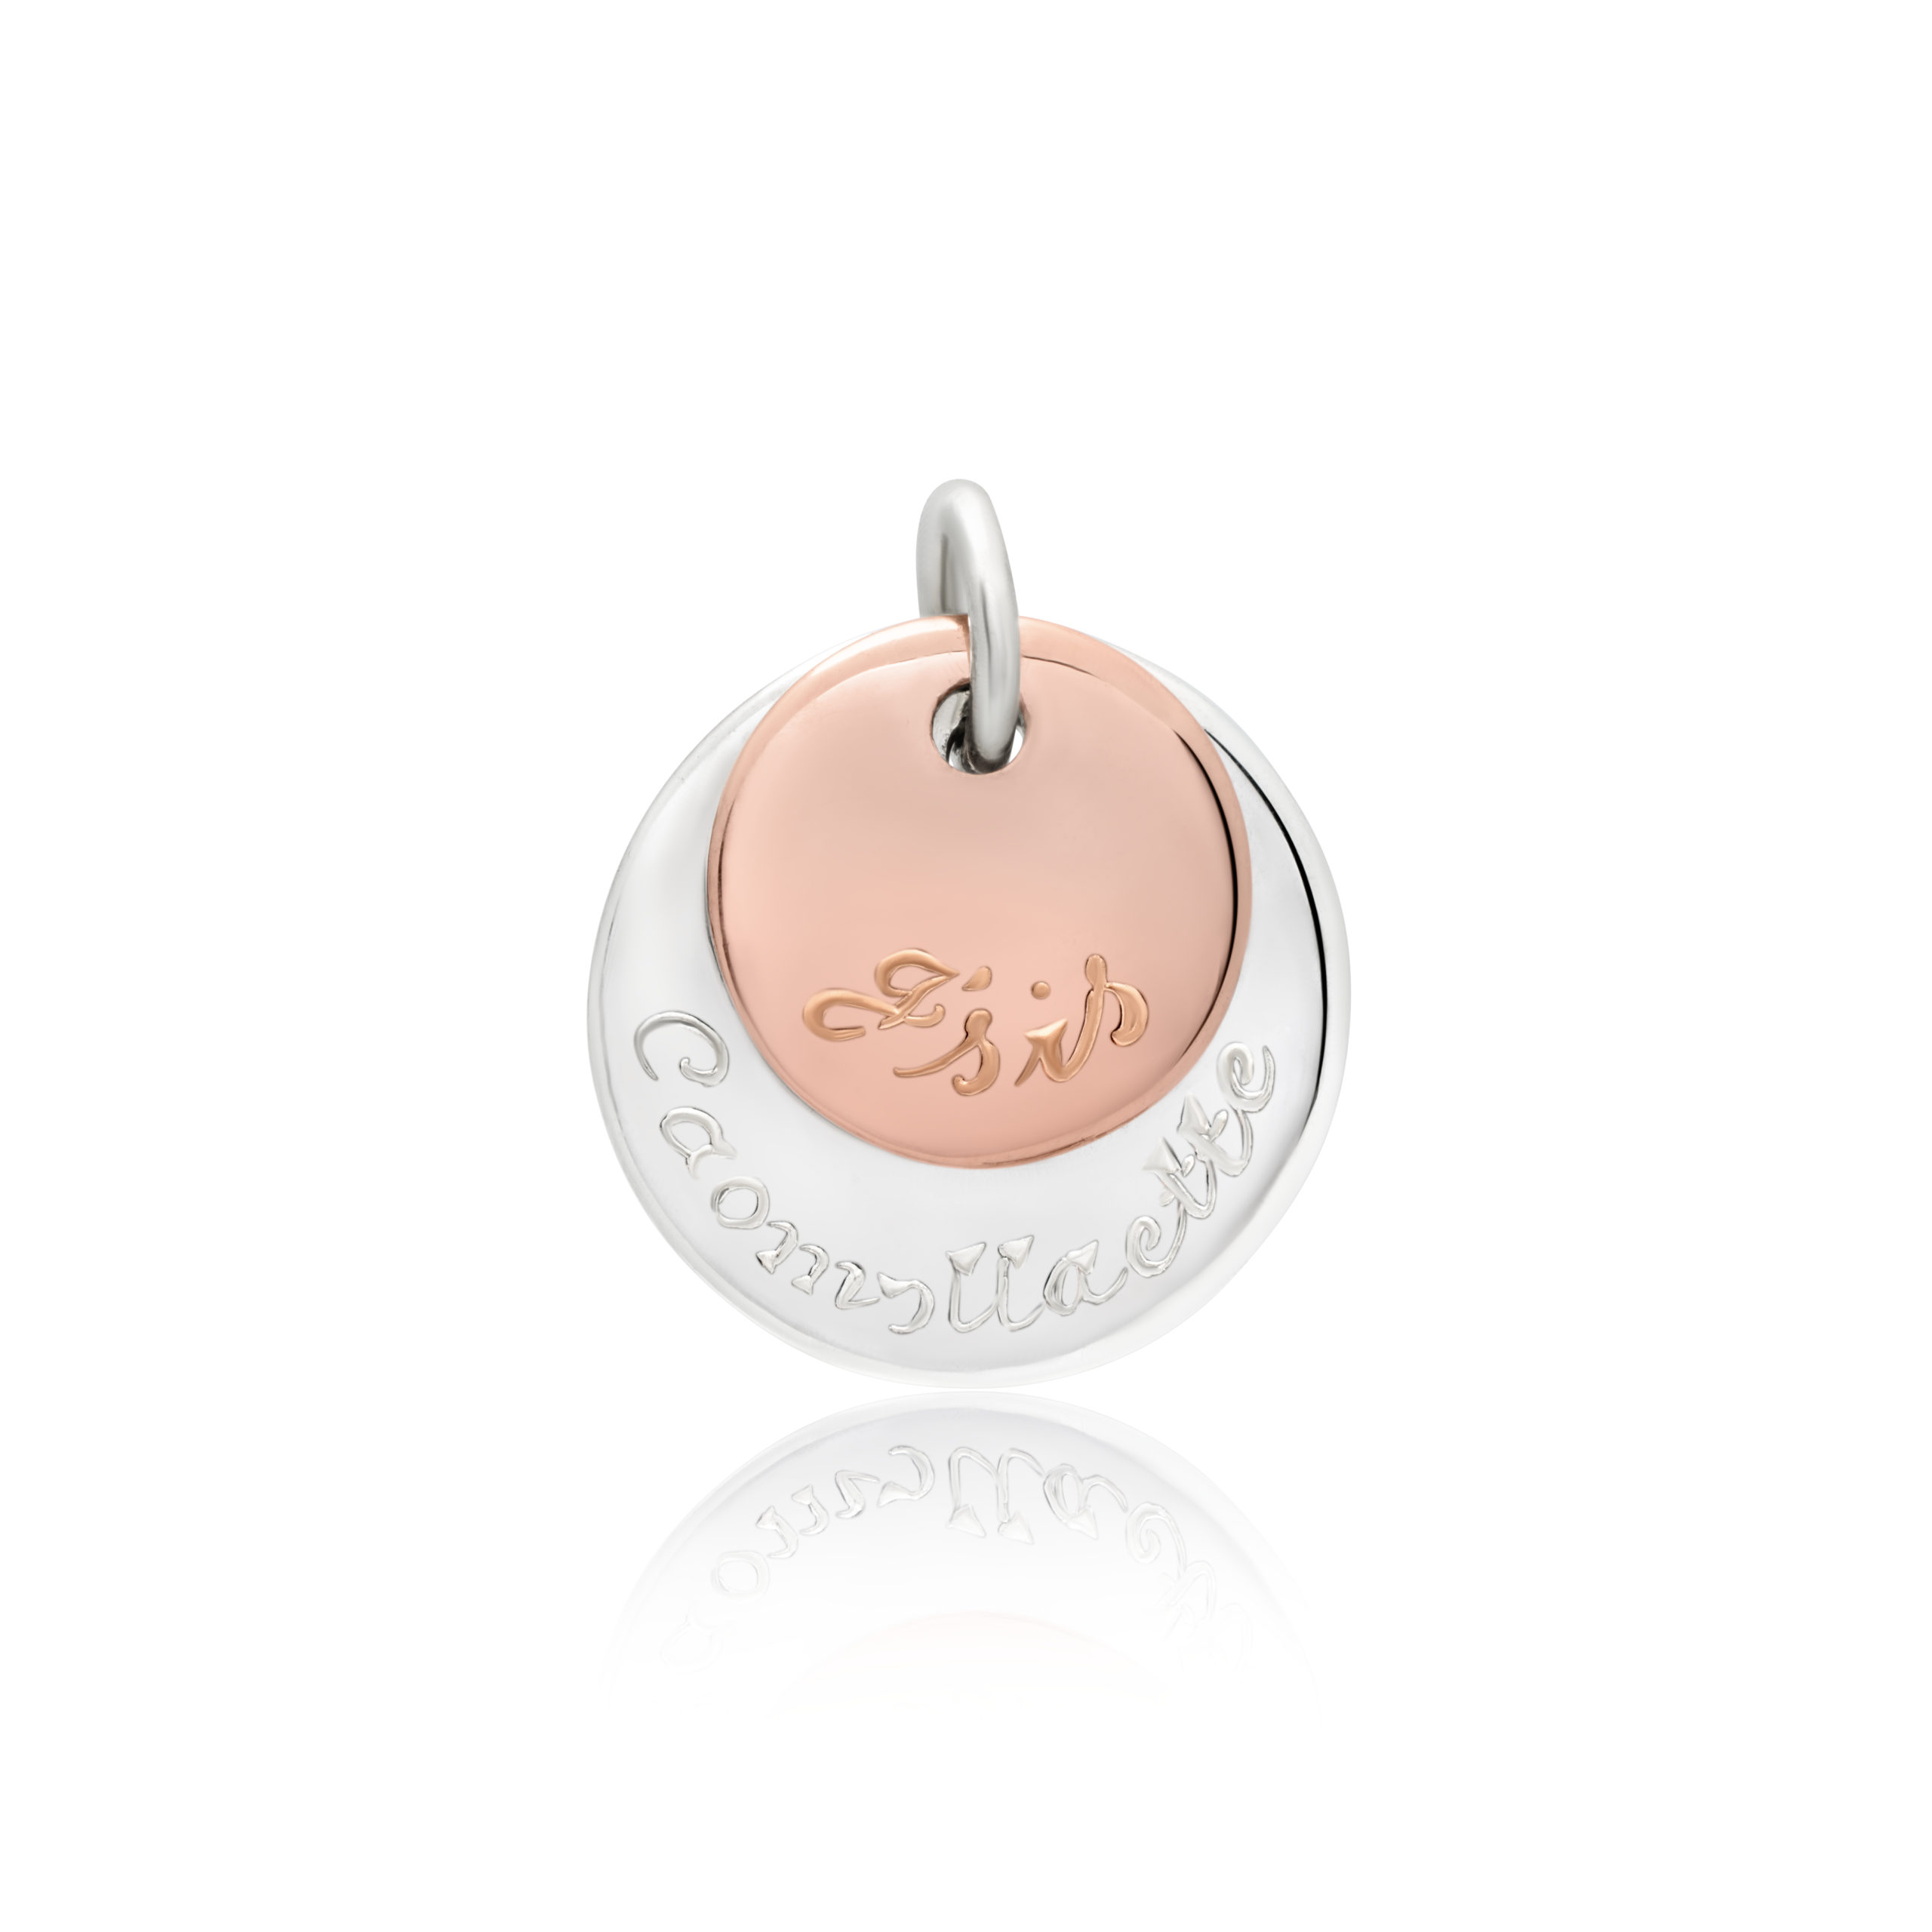 I Am Complete Sterling Silver & 9ct Rose Gold Charm / Pendant